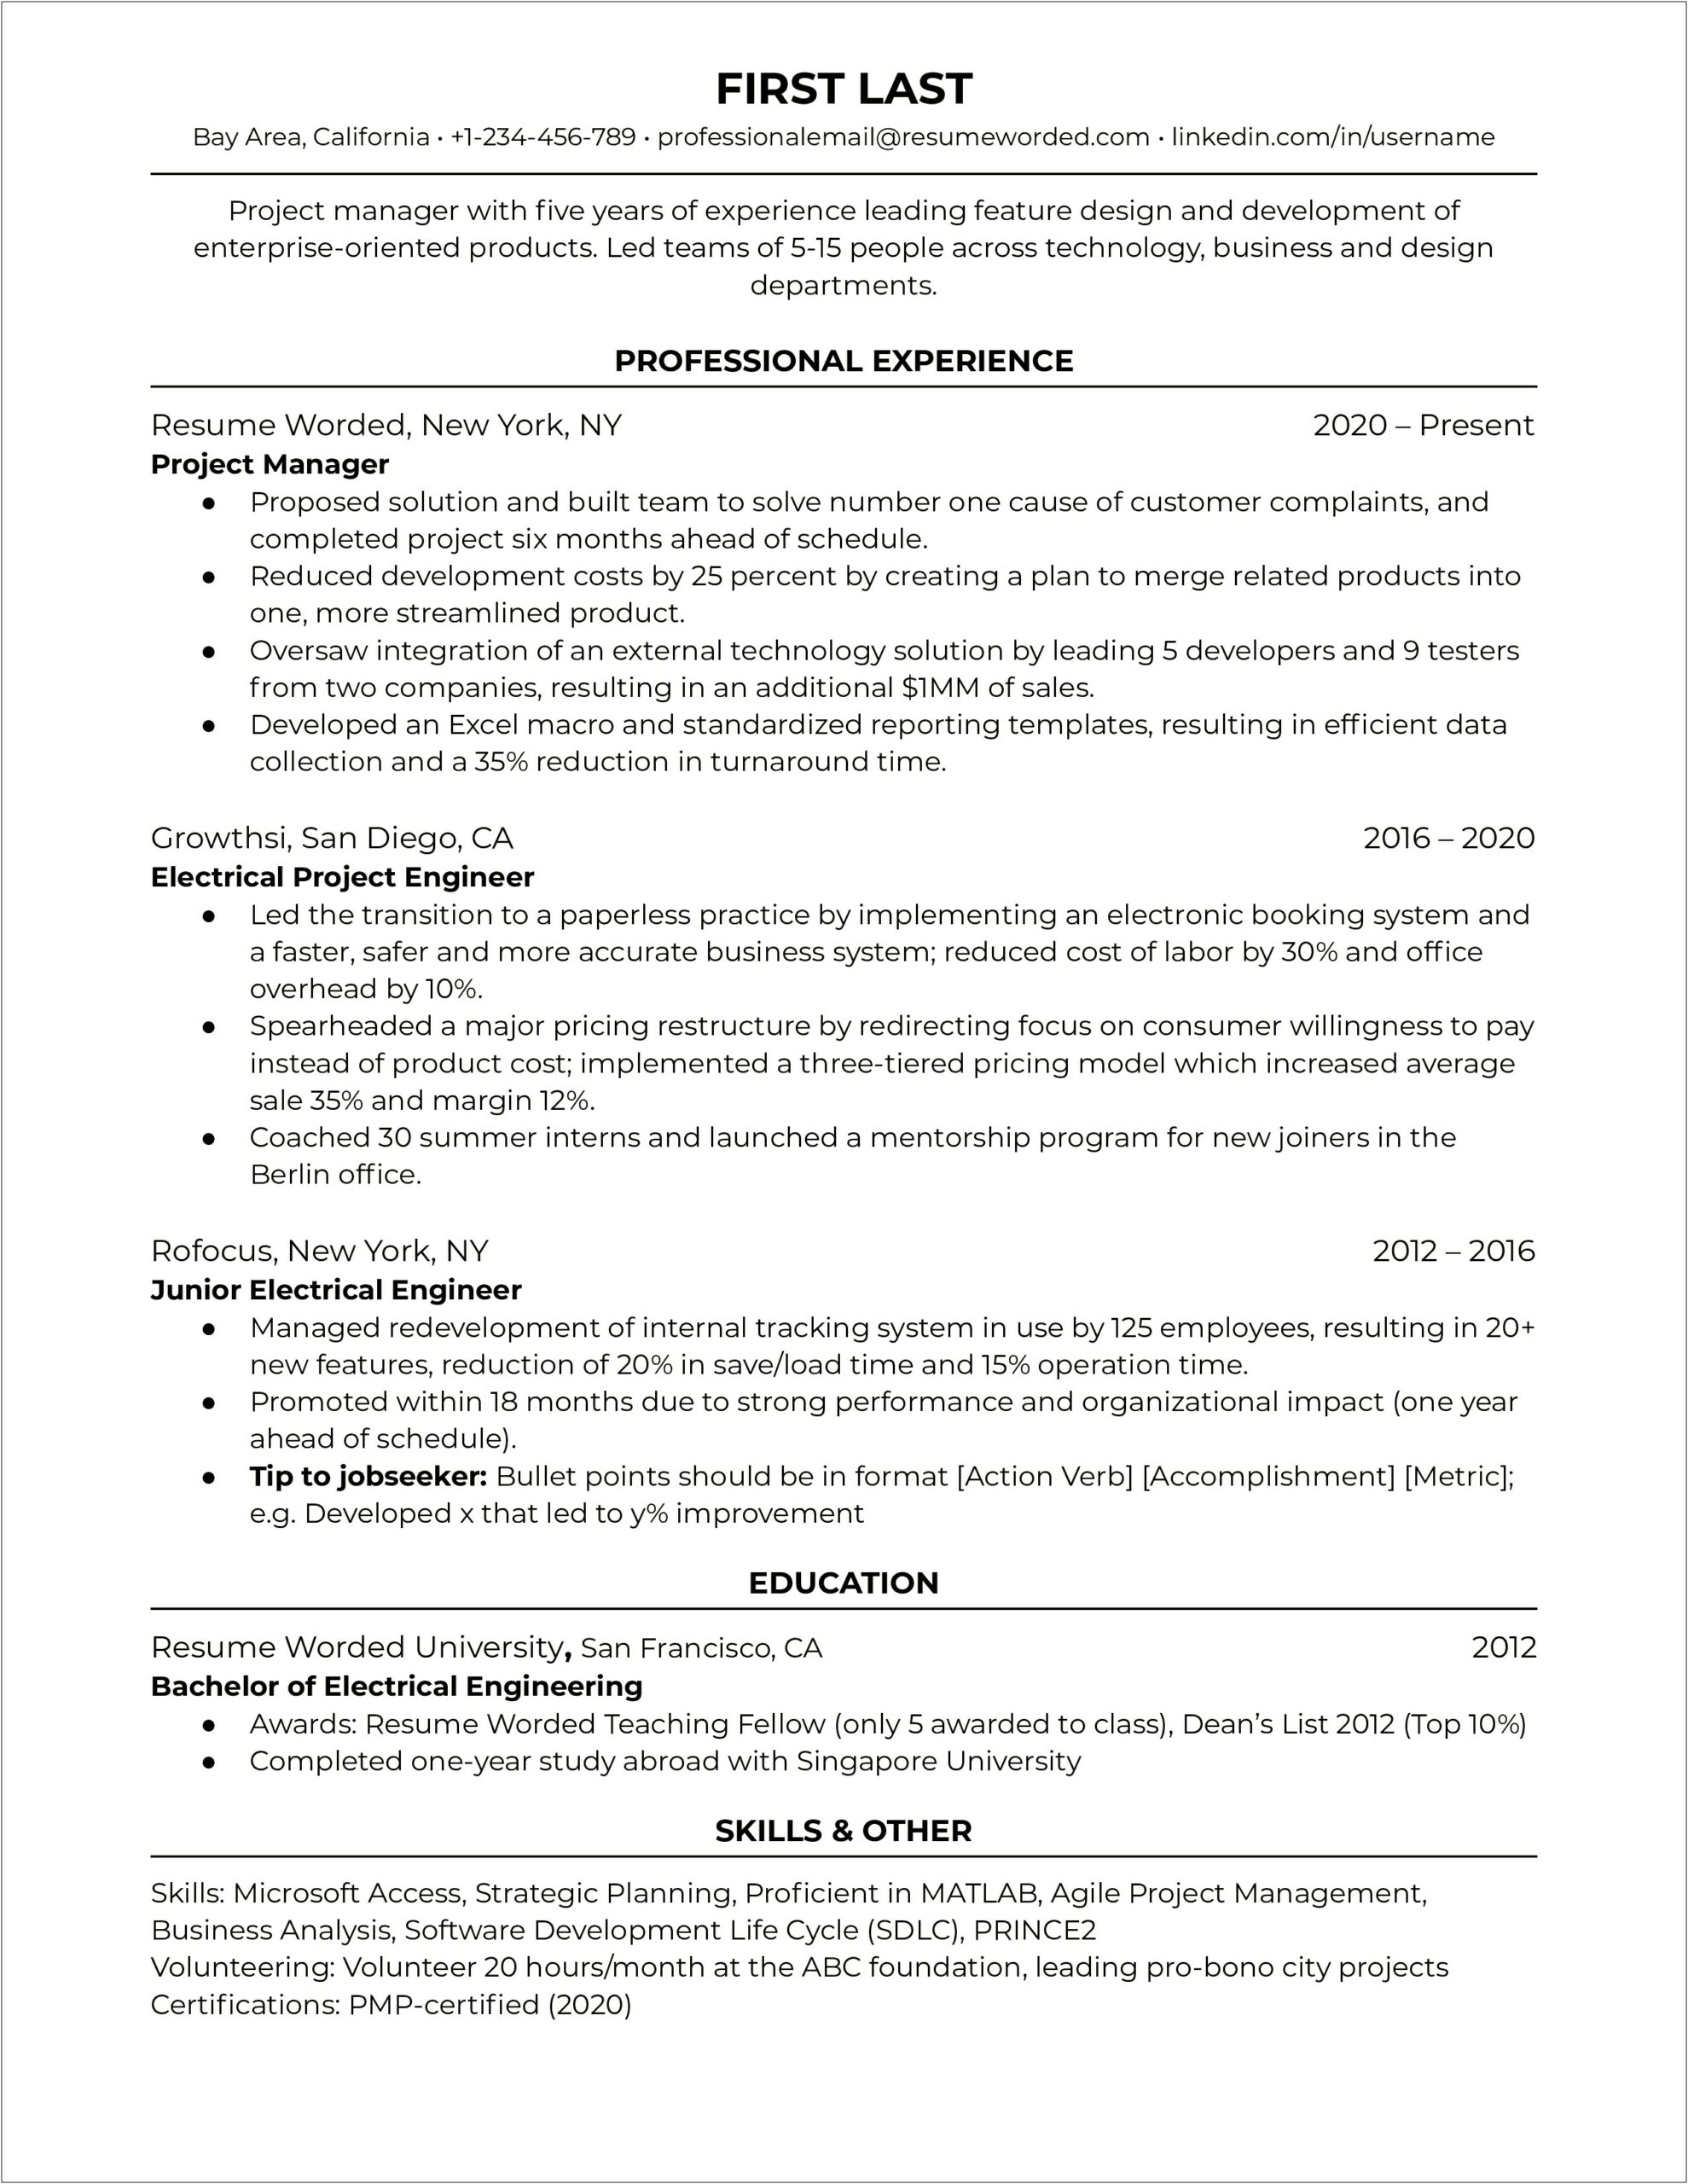 Highlight Work Projects In A Resume